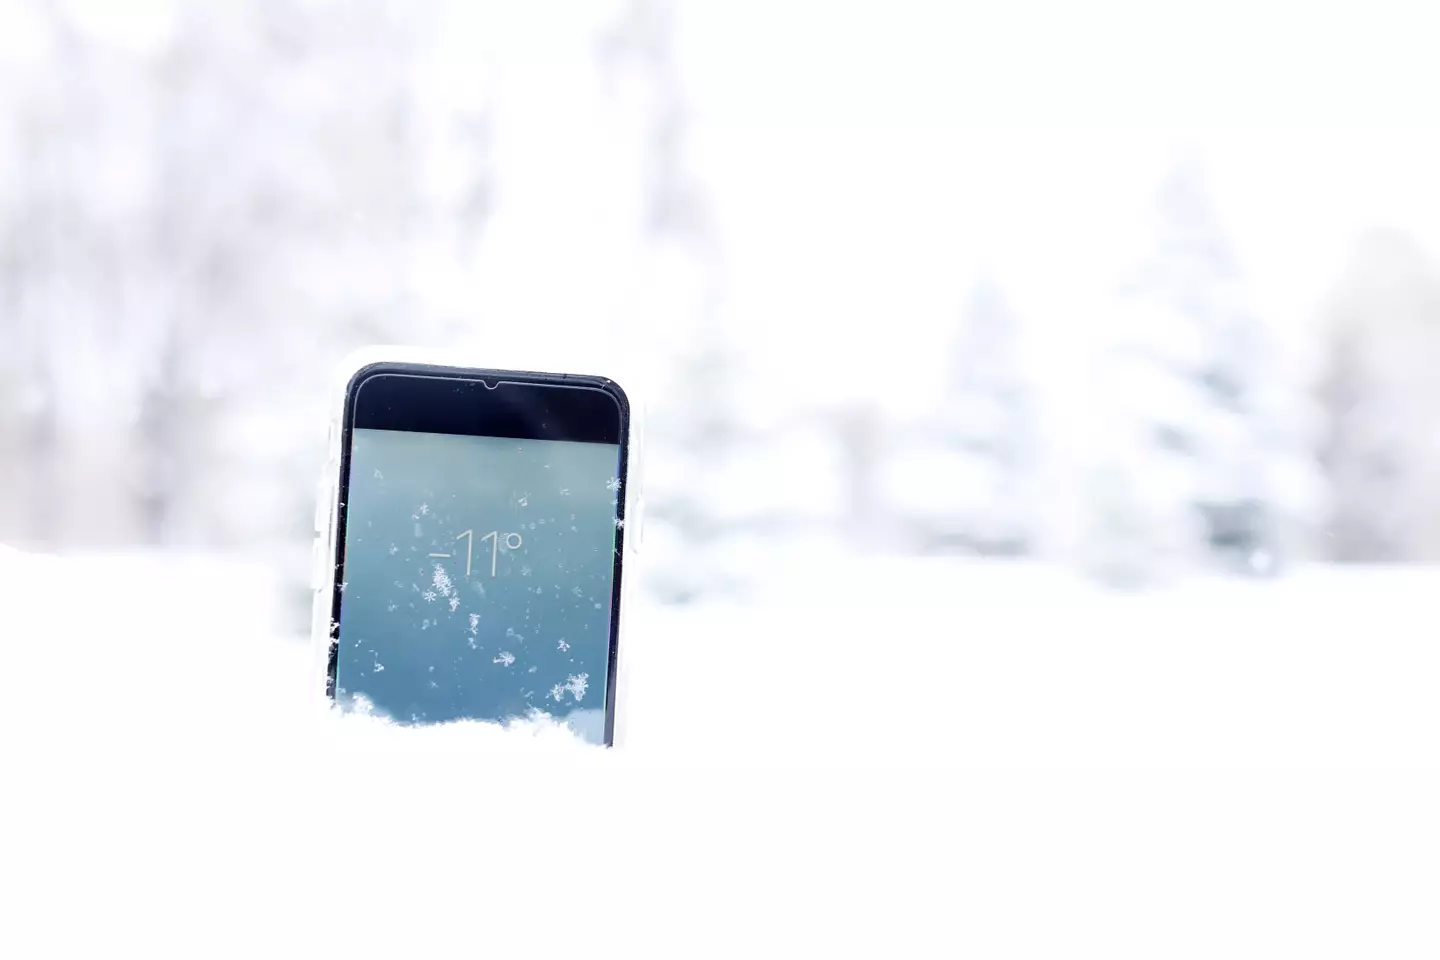 It's no surprise the cold weather has impact on your battery life.